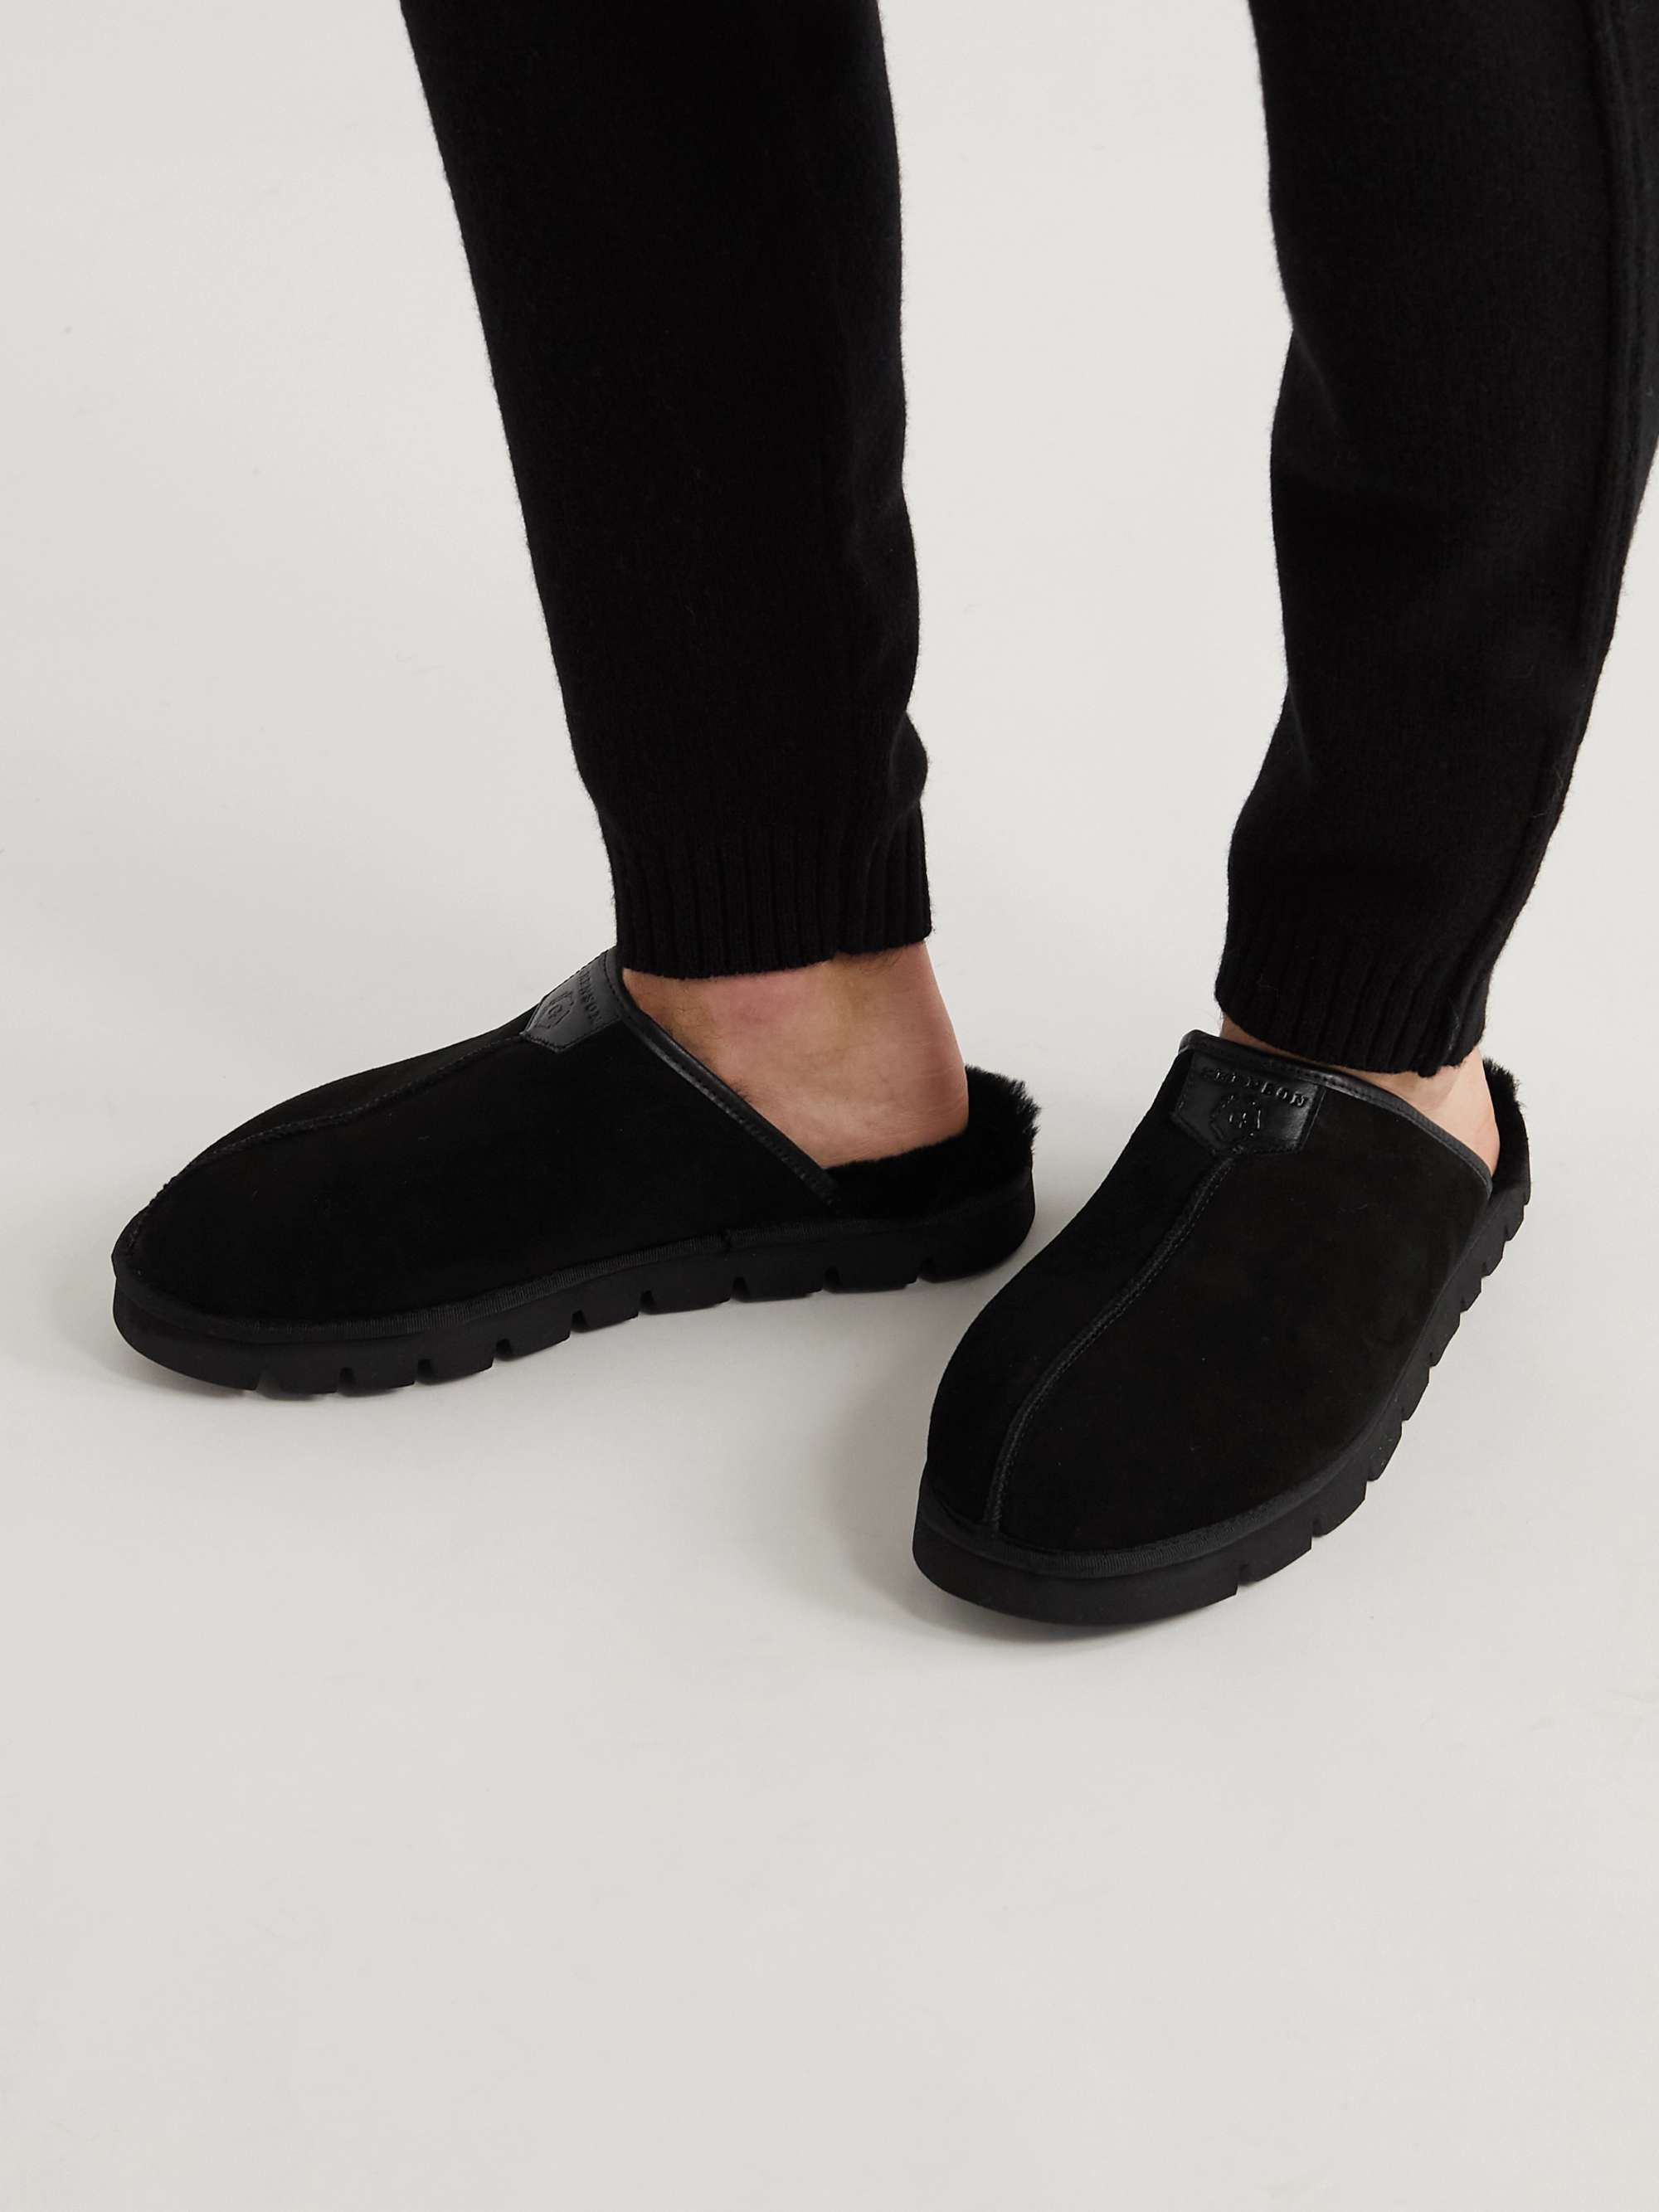 GRENSON Wainwright Shearling-Lined Suede Slippers